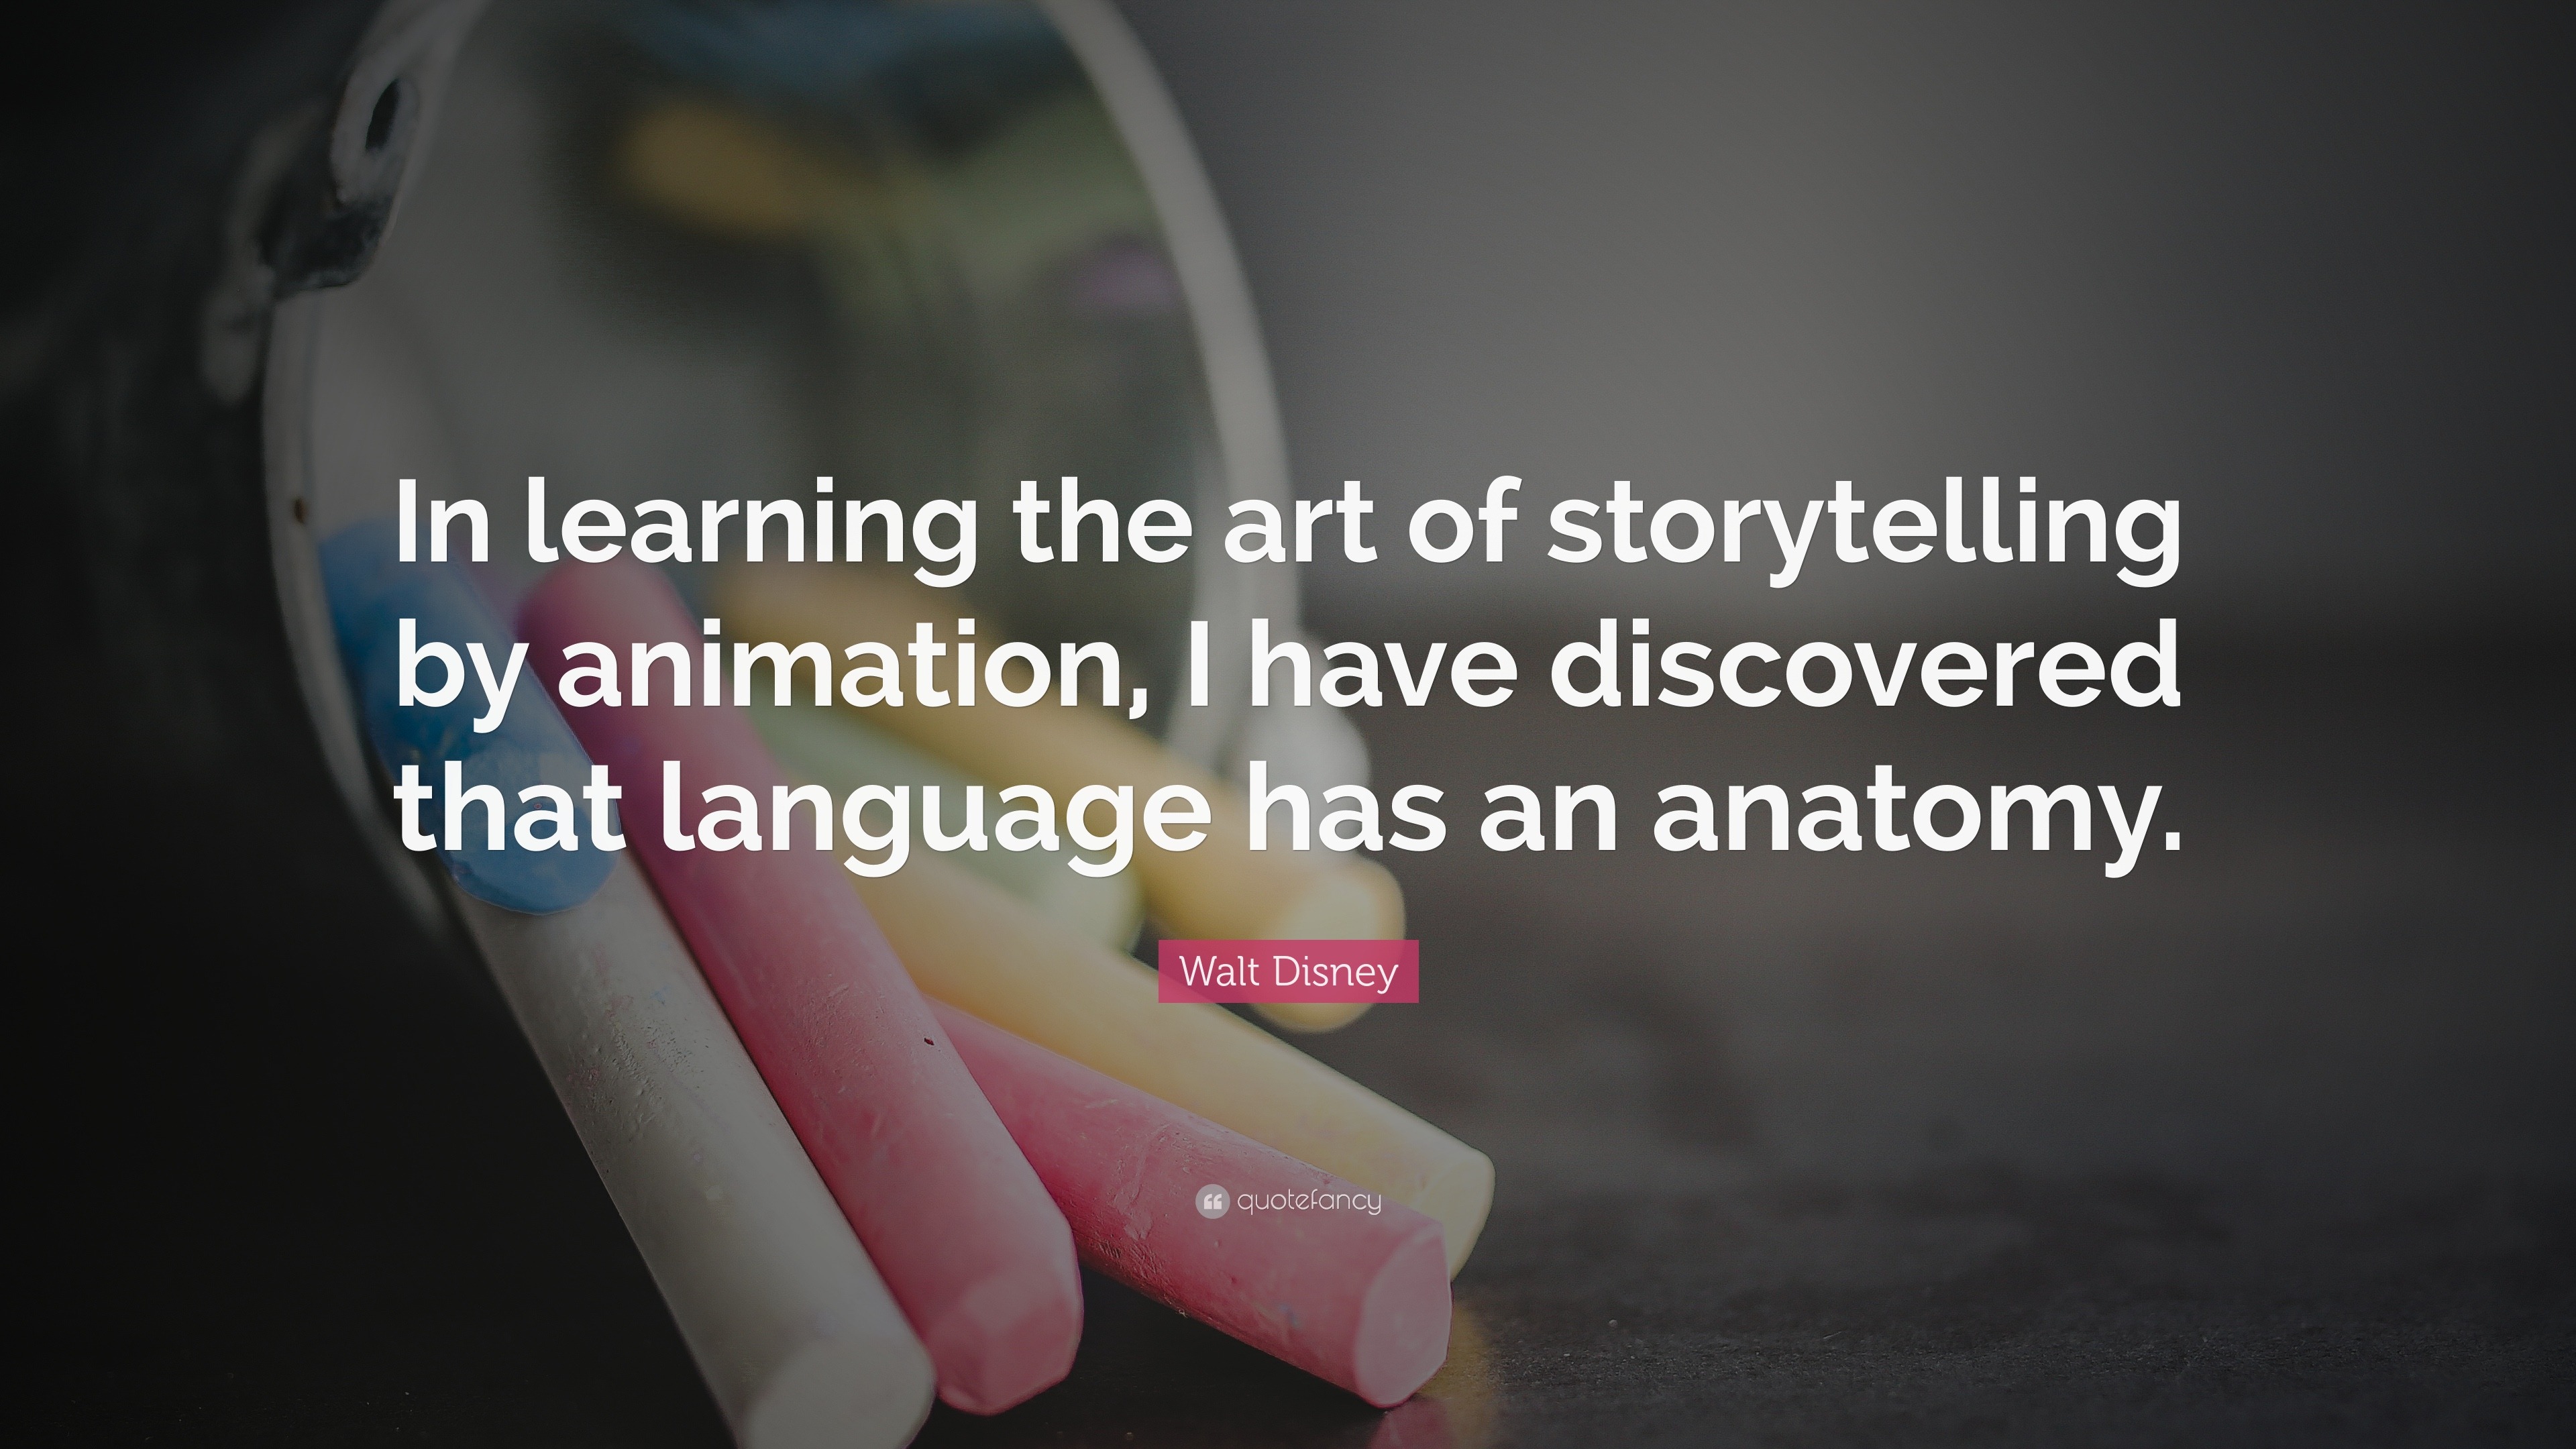 Walt Disney Quote: “In learning the art of storytelling by animation, I  have discovered that language